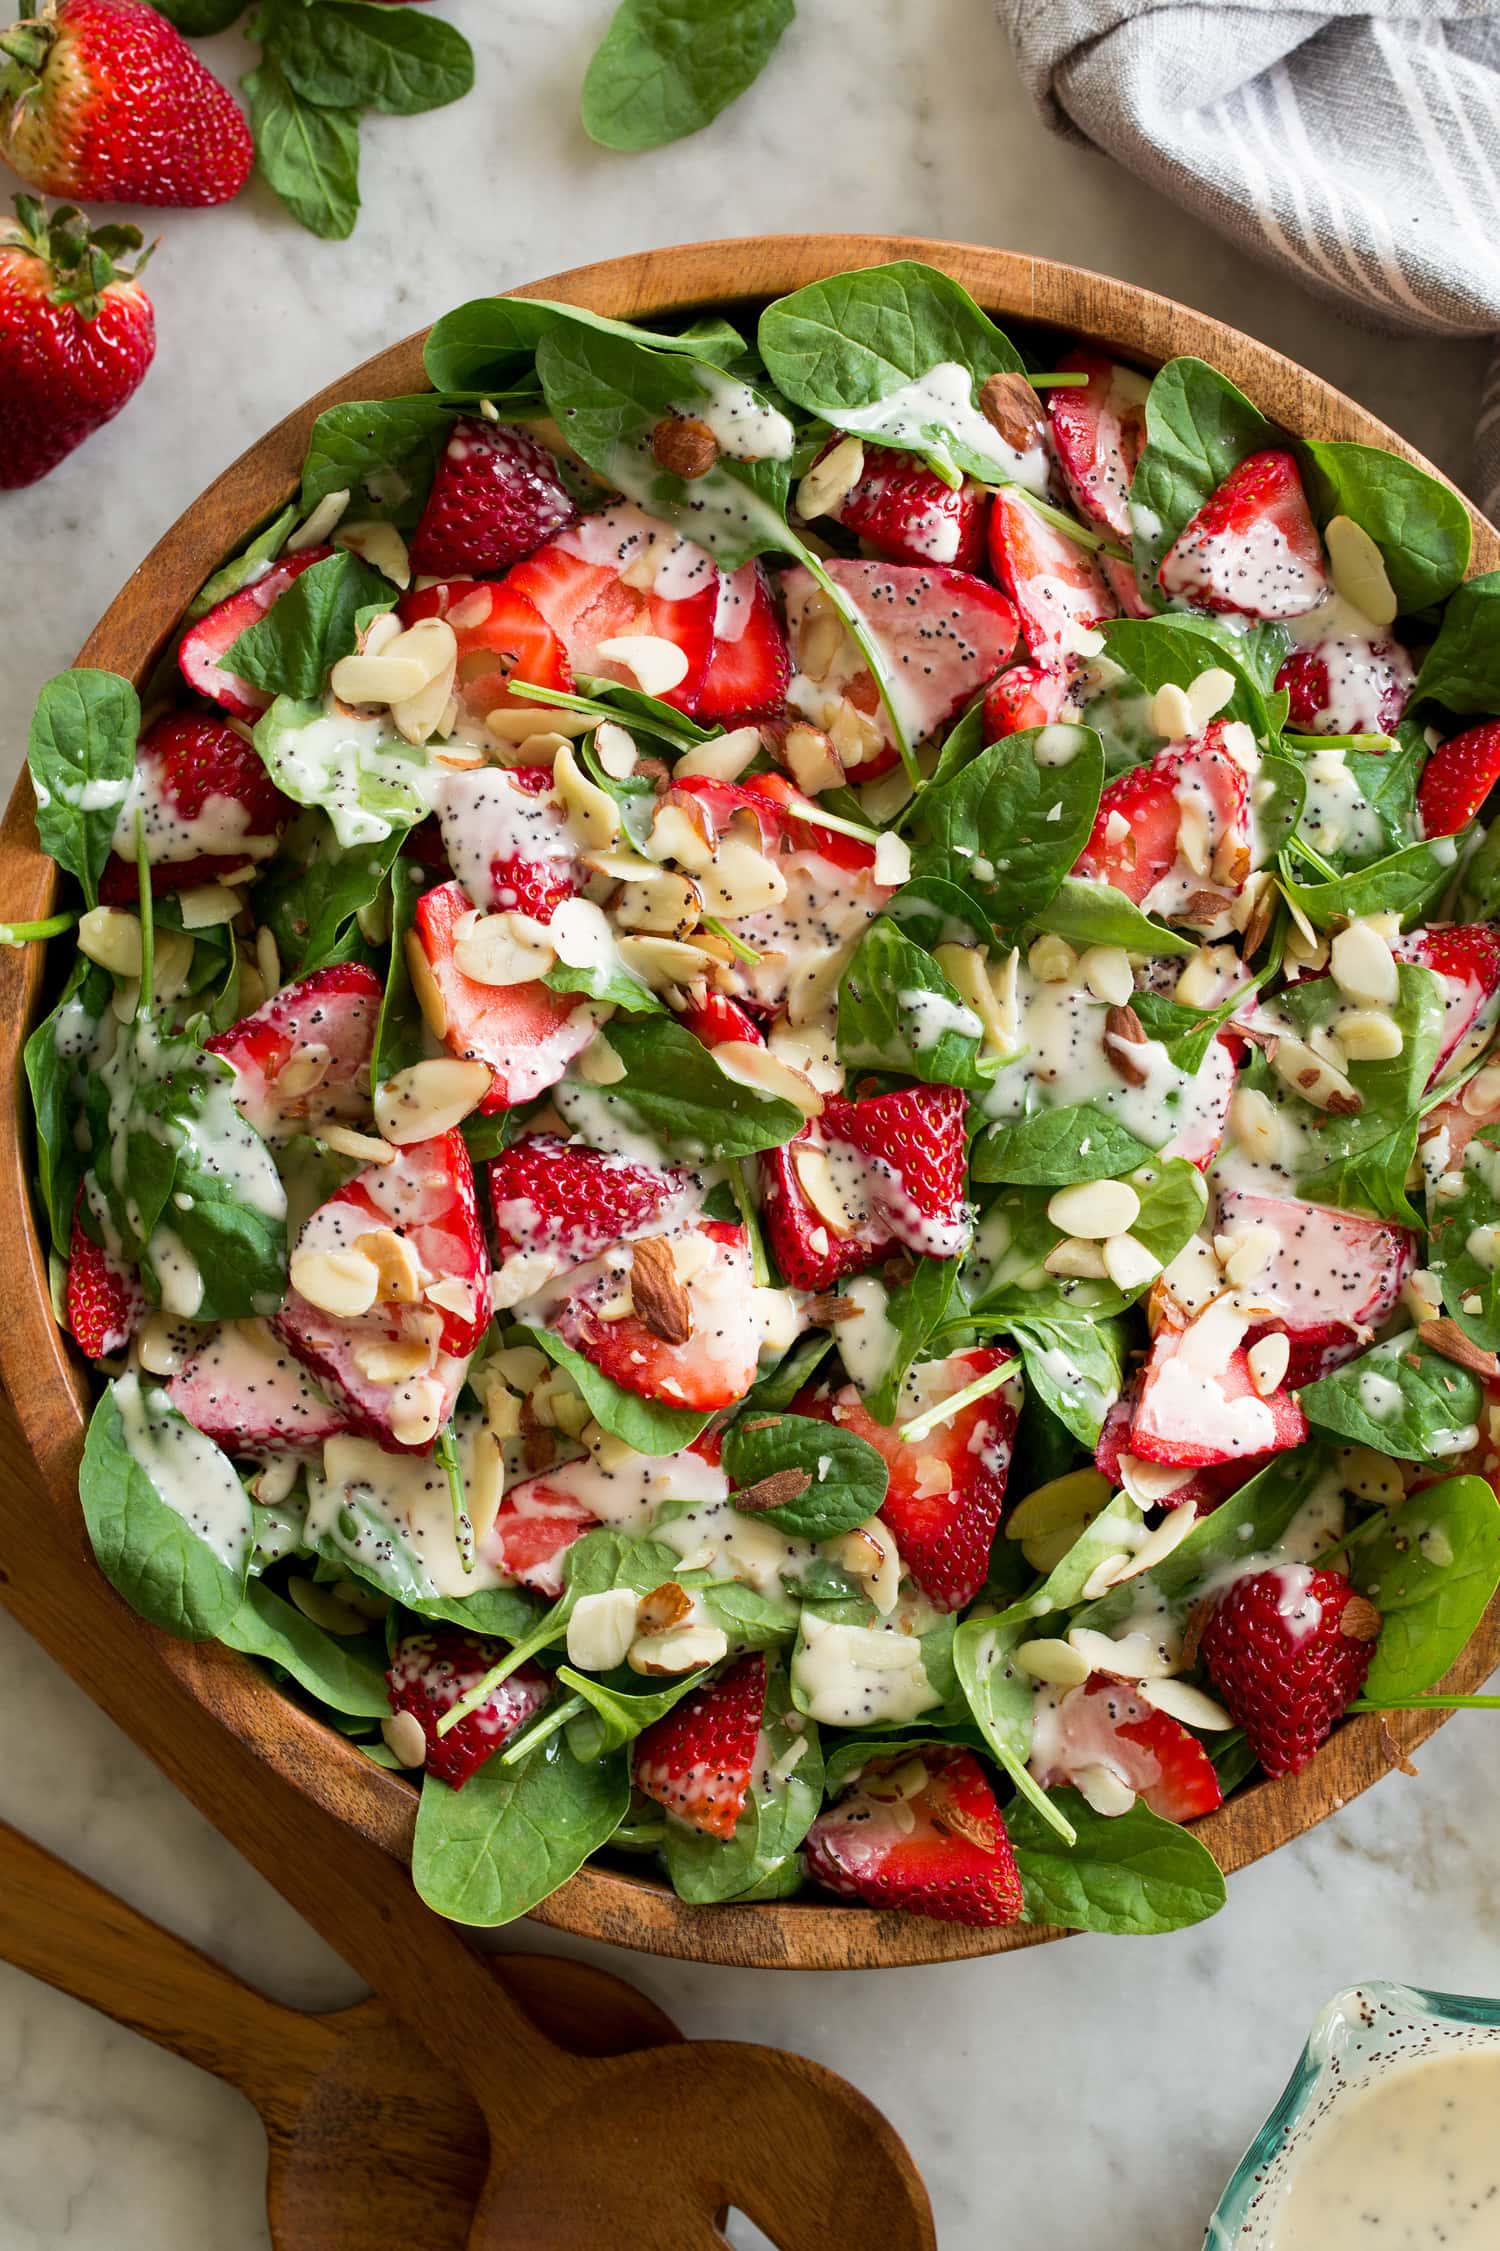 Quick and easy strawberry spinach salad from scratch.